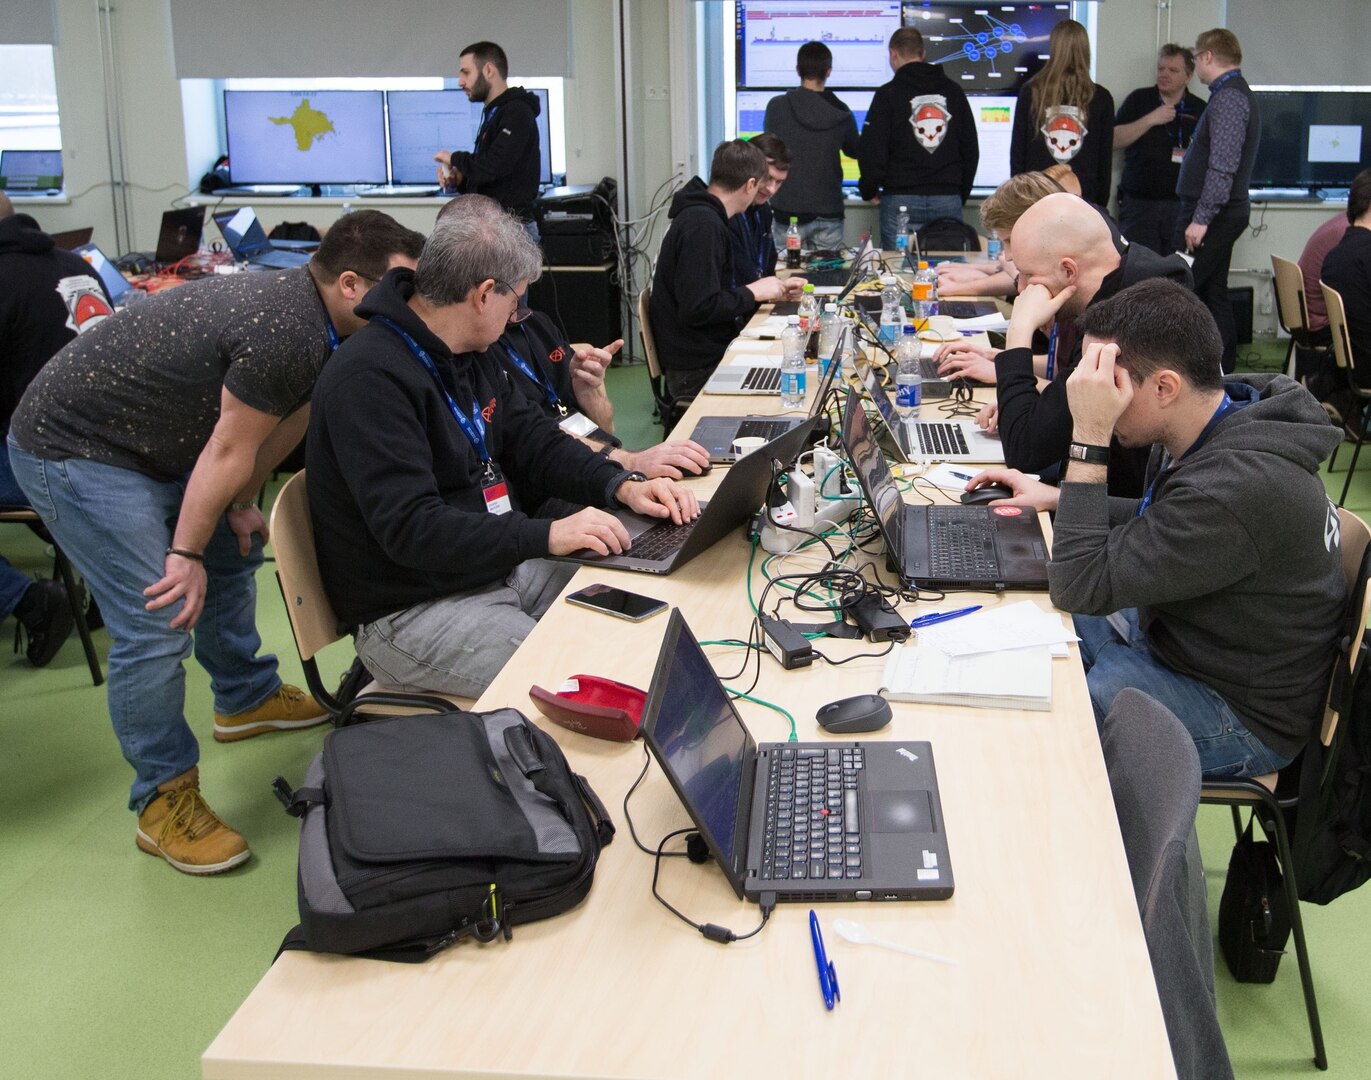 More than 100 cyber operators from 21 countries participate in Exercise Crossed Swords 19, at Tallinn, Estonia, on Jan. 31, 2019. The annual exercise, which ran Jan. 28 to Feb. 1, included hands-on, full-scale cyber operations where kinetic and cyber operations were carried out simultaneously, including challenges to industrial control systems, physical security systems, unmanned aerial vehicles and maritime surveillance systems.